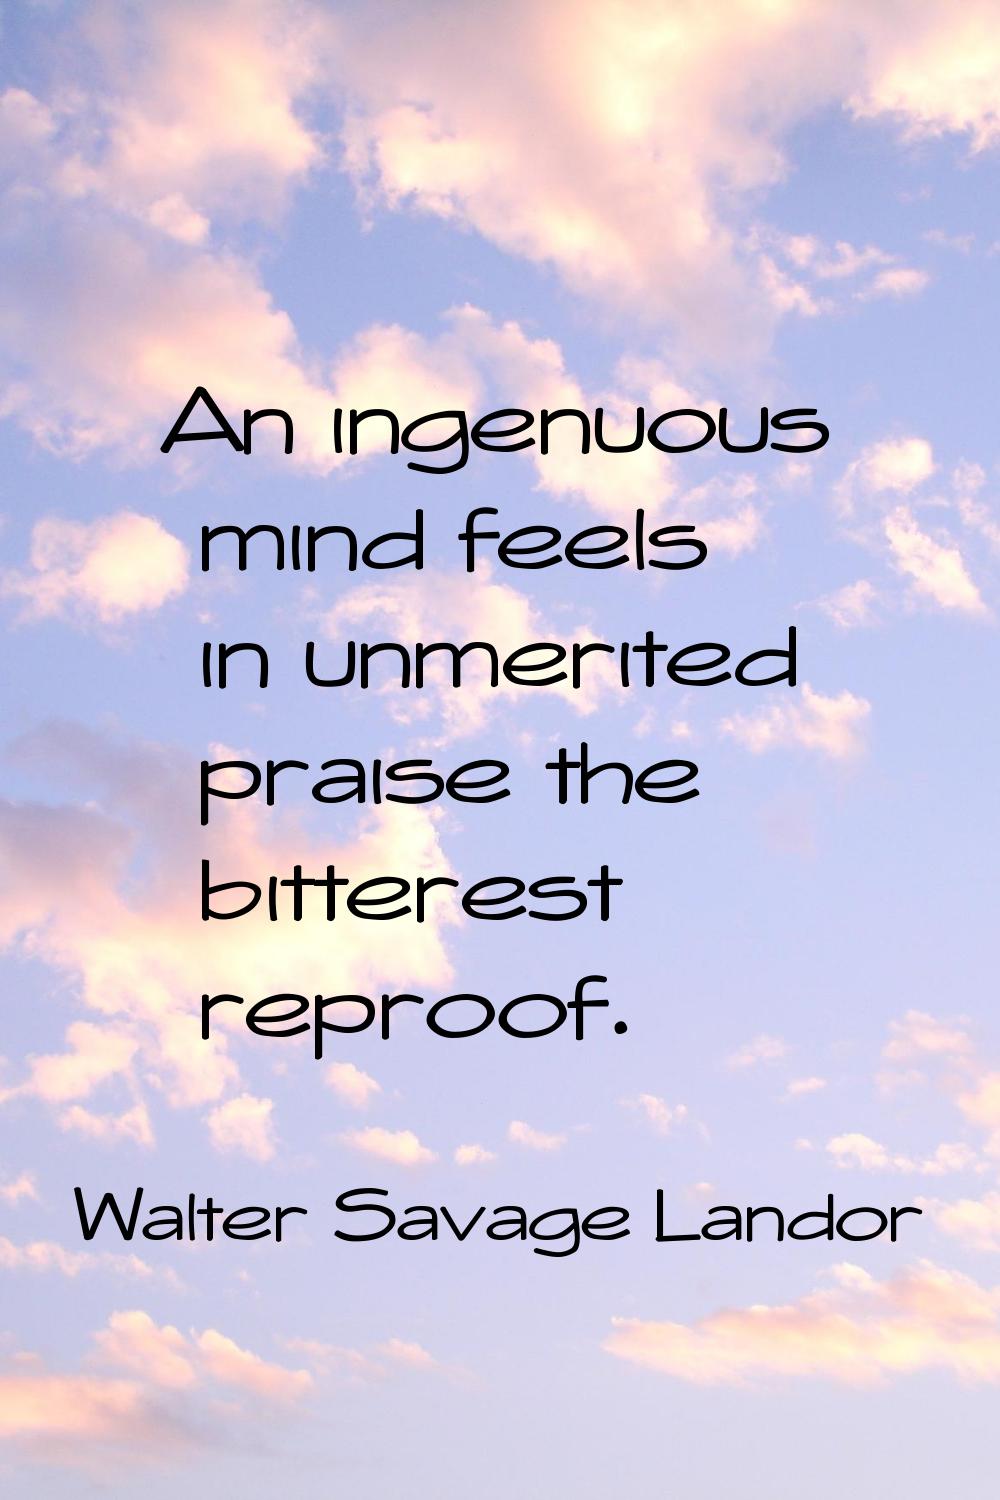 An ingenuous mind feels in unmerited praise the bitterest reproof.